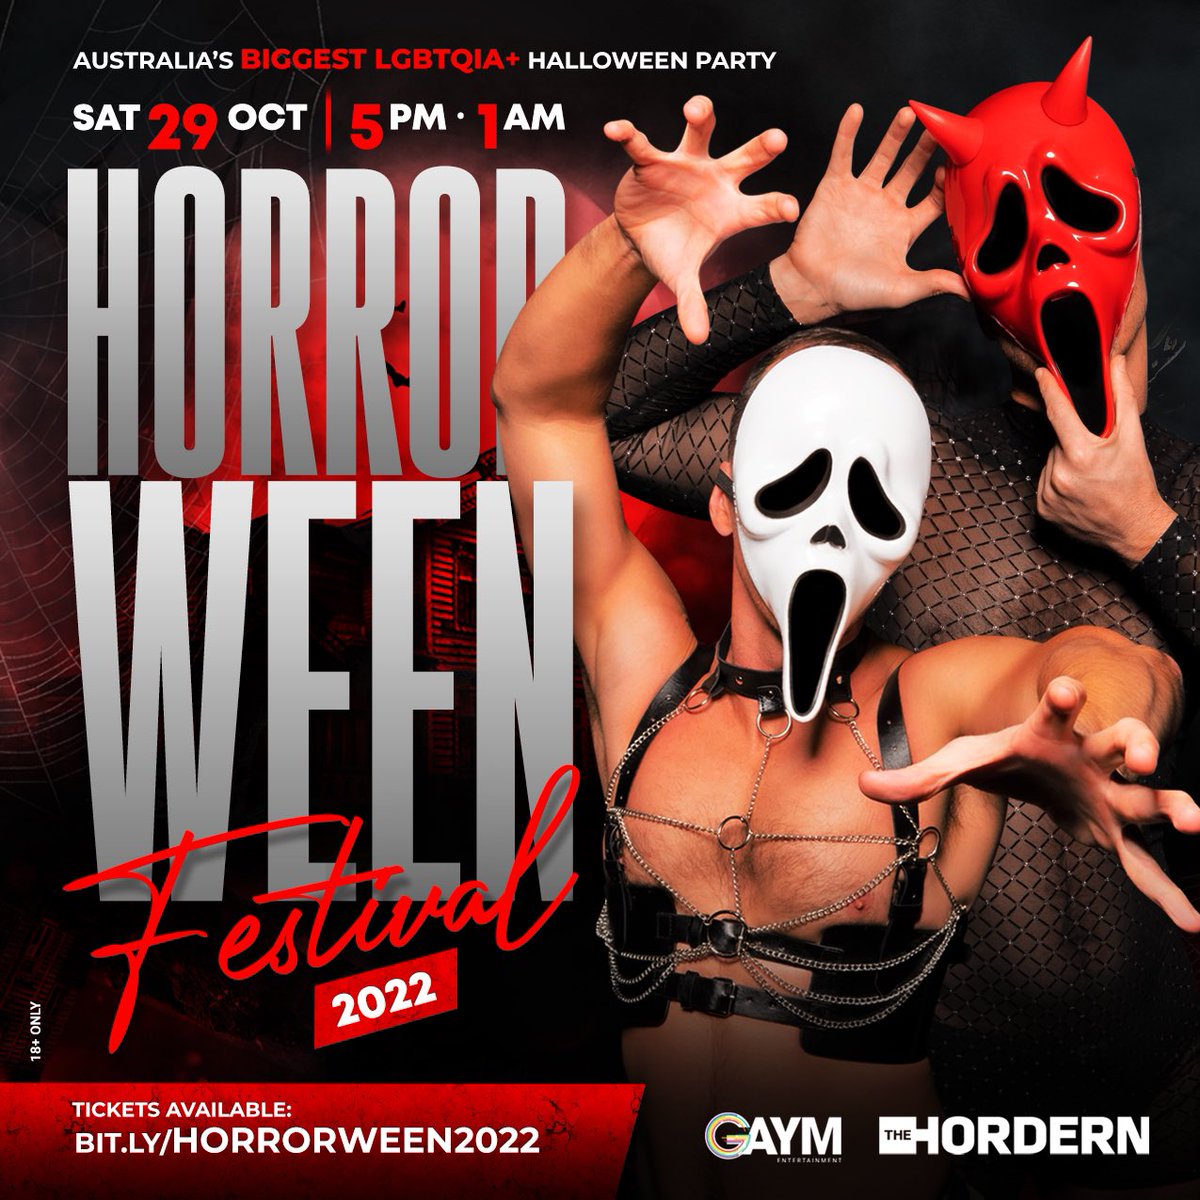 🎃 HORRORWEEN IS COMING 🎃 
Saturday, October 29th 
5pm-1am
@hordernpavilon 

Tickets - bit.ly/HORRORWEEN2022

Headlined by: @VioletChachki @gottmik @thatbitchlemon @DjAronOfficial @BethSacks @djannelouise @DJTommyLove 

#horrorween #gaymentertainment #hordernpavilon #halloween